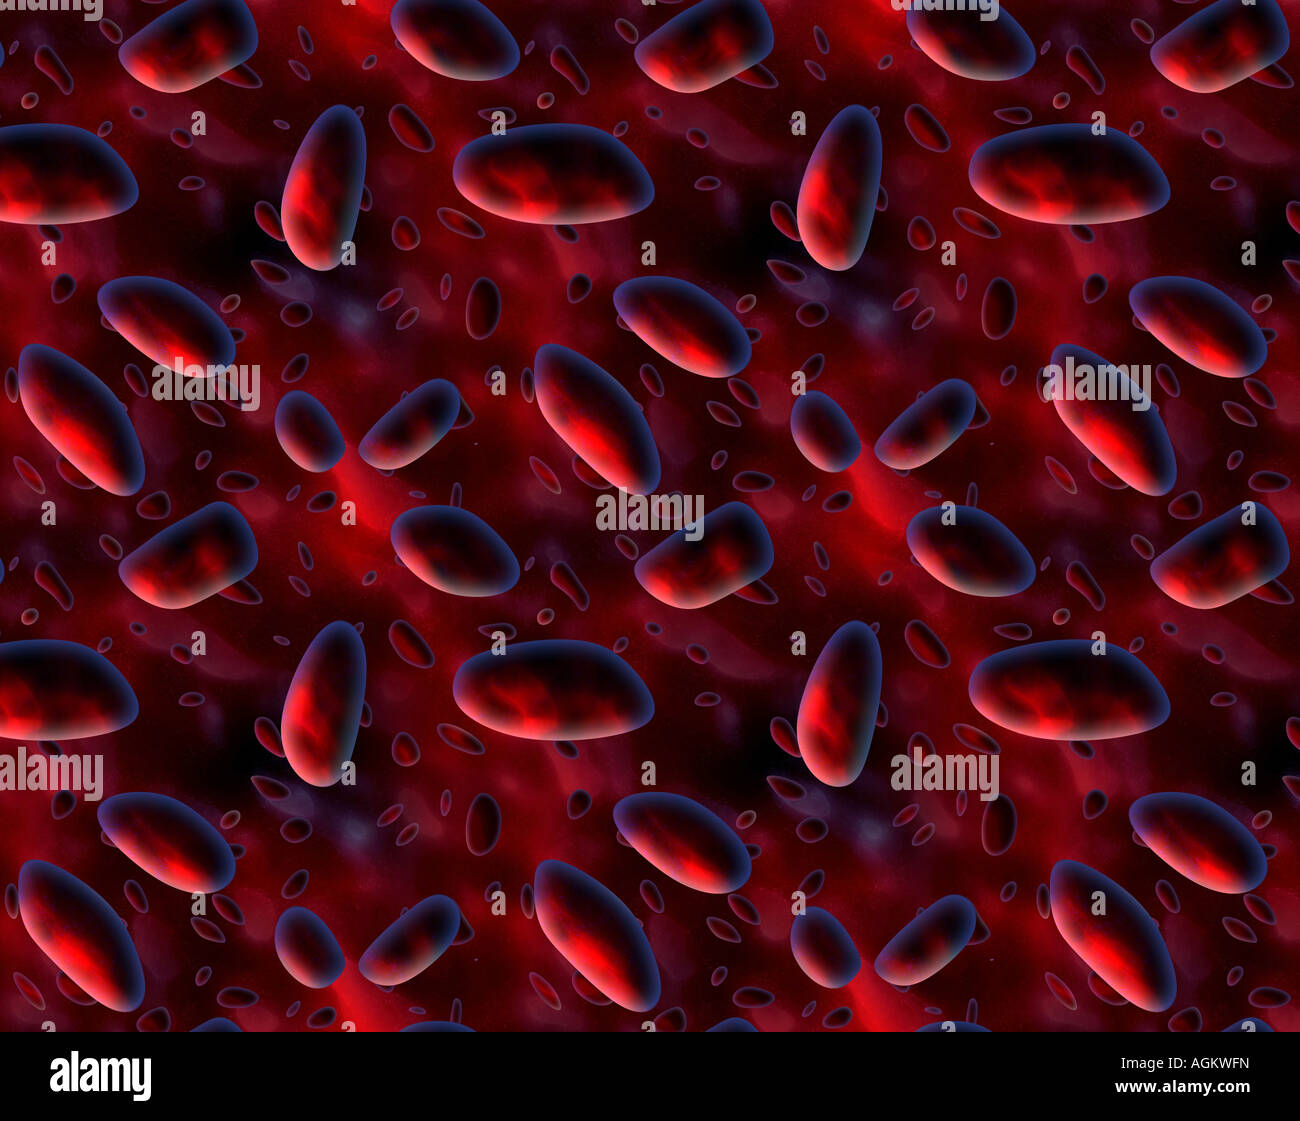 large image of blood cells floating around in an artery Stock Photo